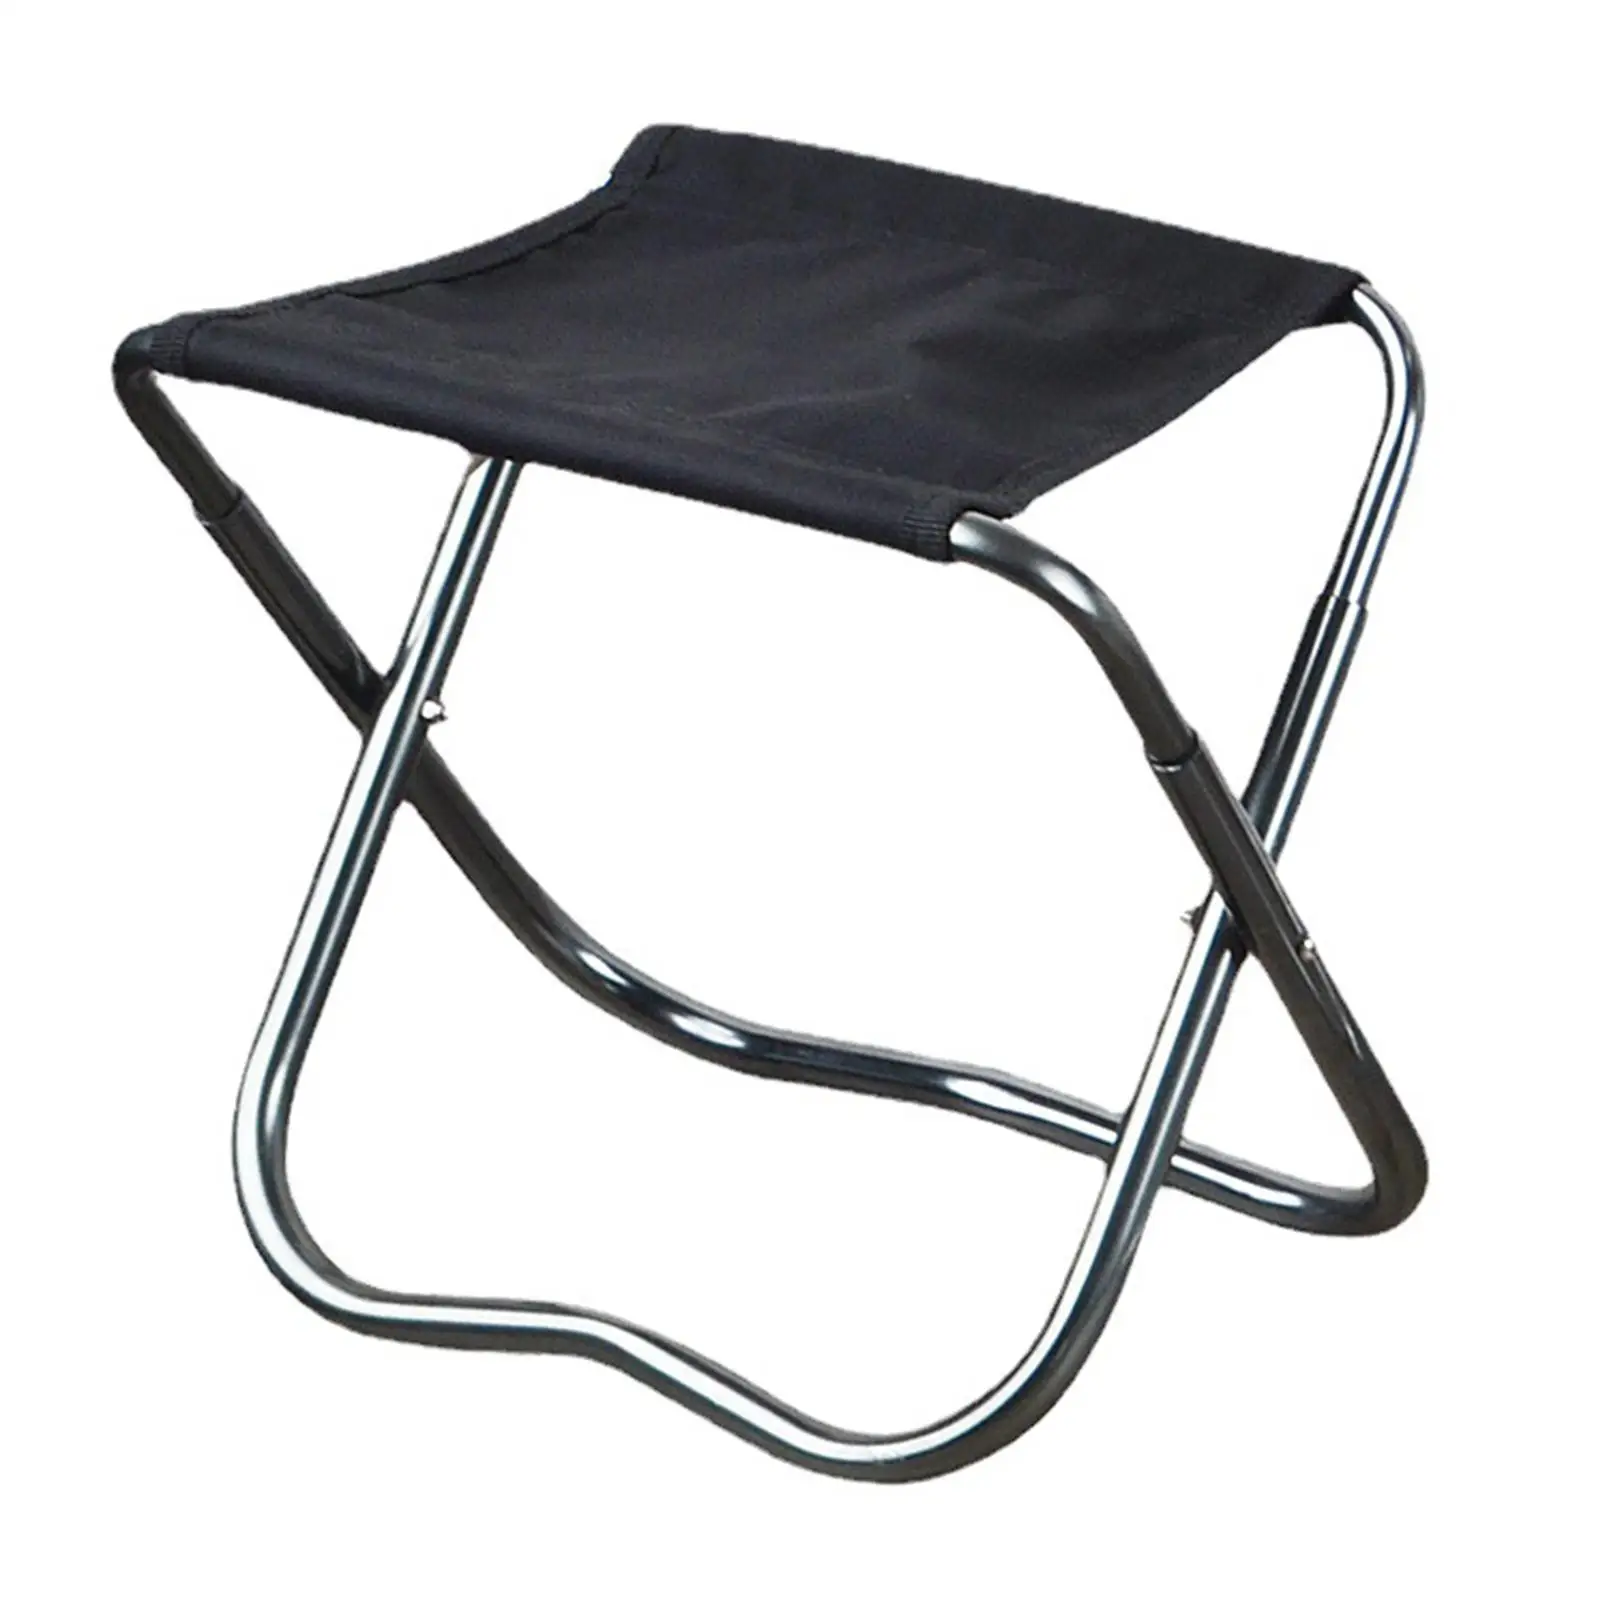 Camping Chairs Wear Resistant Aluminum Alloy Bracket Reusable Fishing Chair Camping Seat for Picnic Hiking Lawn BBQ Camping